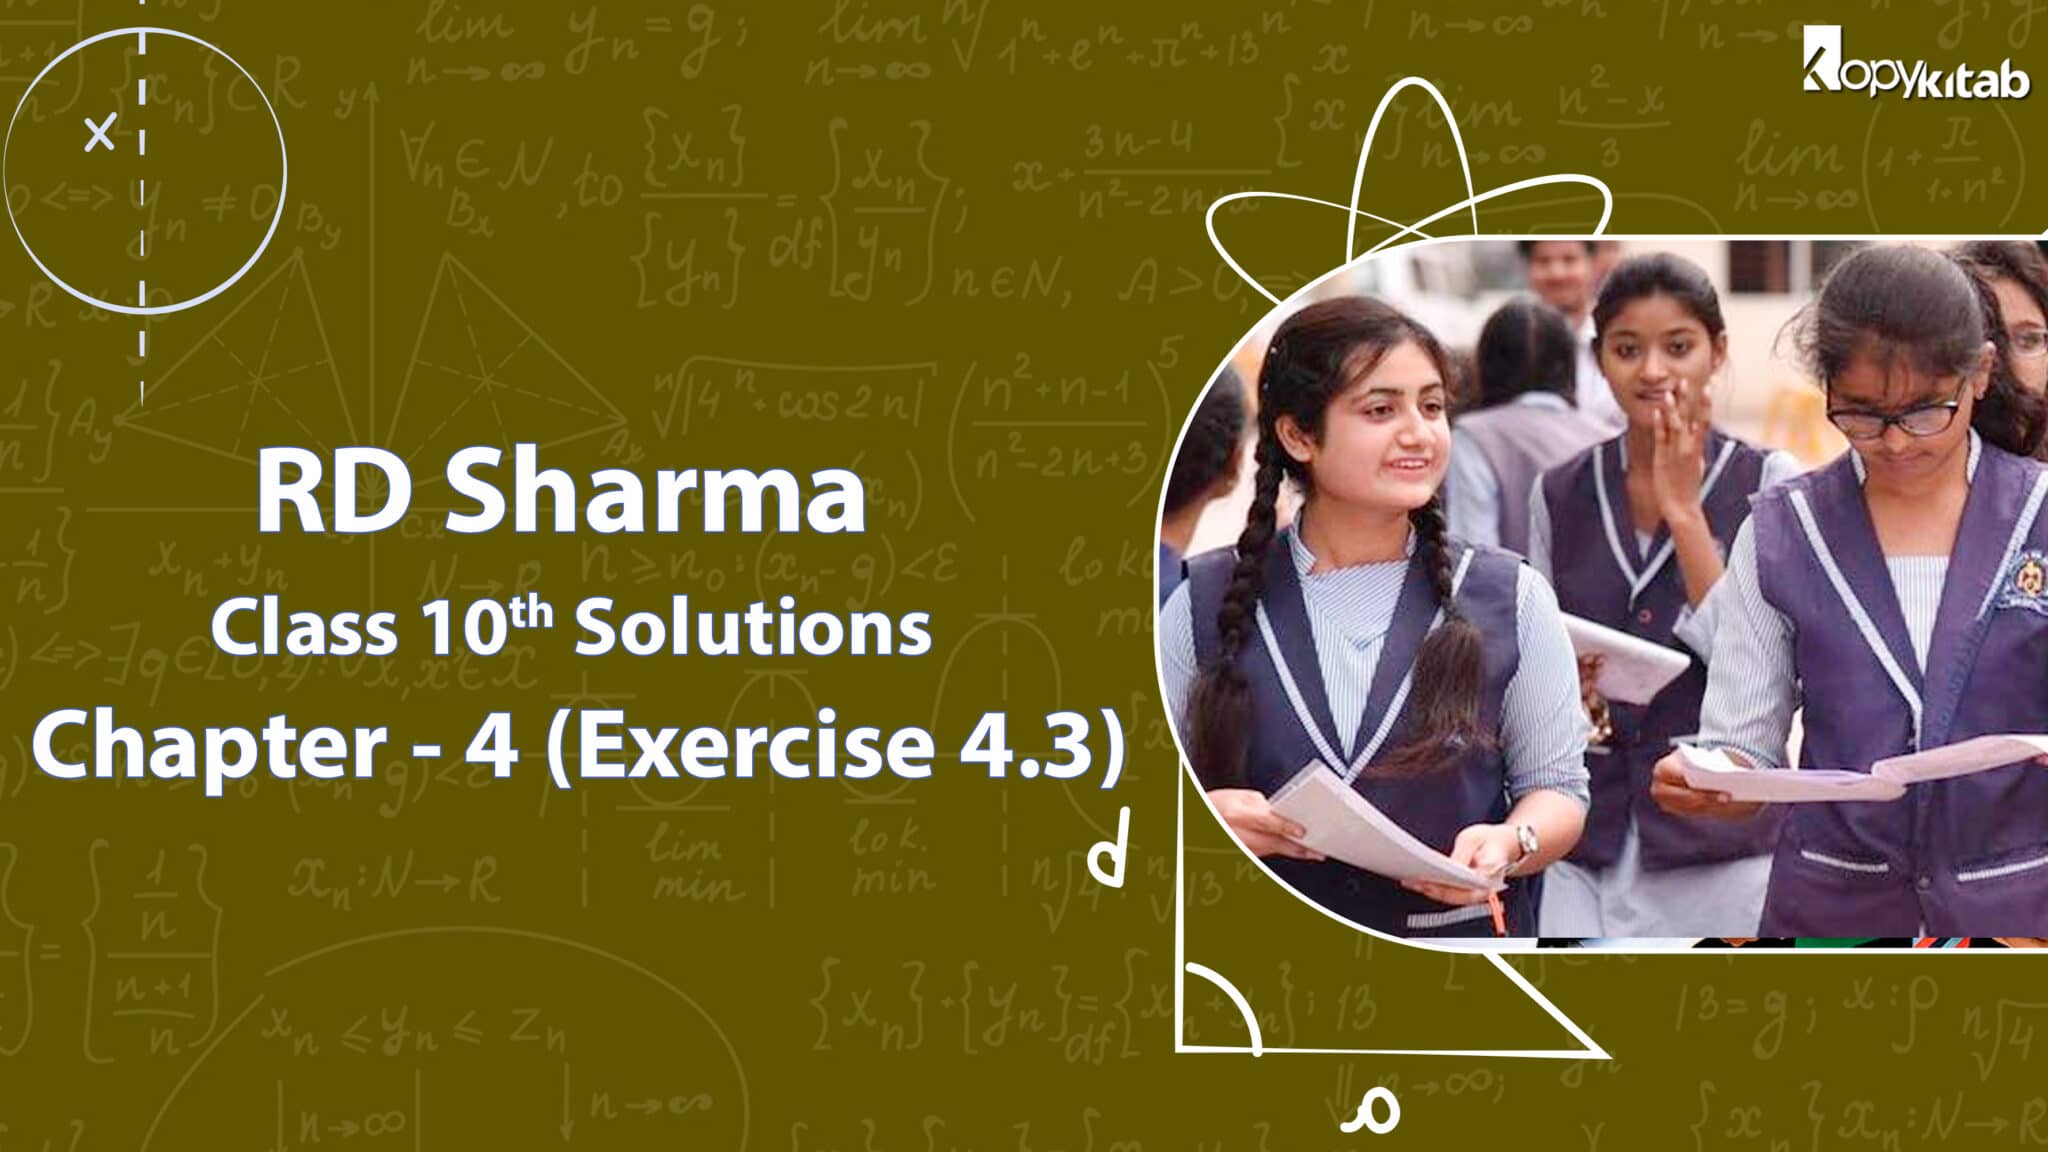 RD Sharma Class 10 Solutions Chapter 4 Exercise 4.3